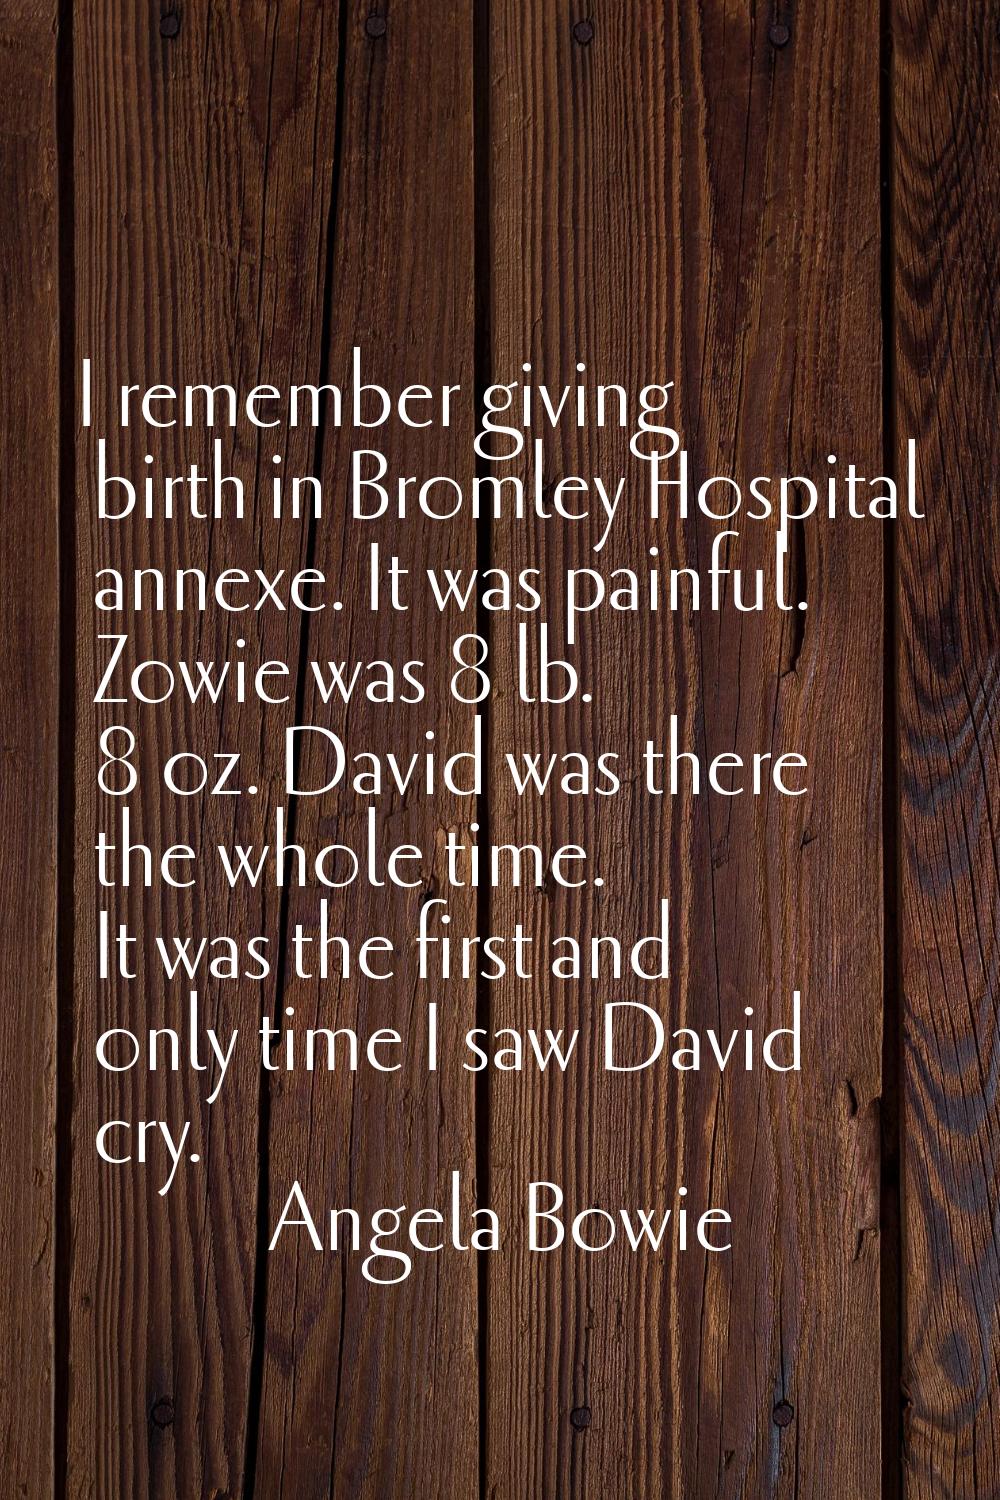 I remember giving birth in Bromley Hospital annexe. It was painful. Zowie was 8 lb. 8 oz. David was